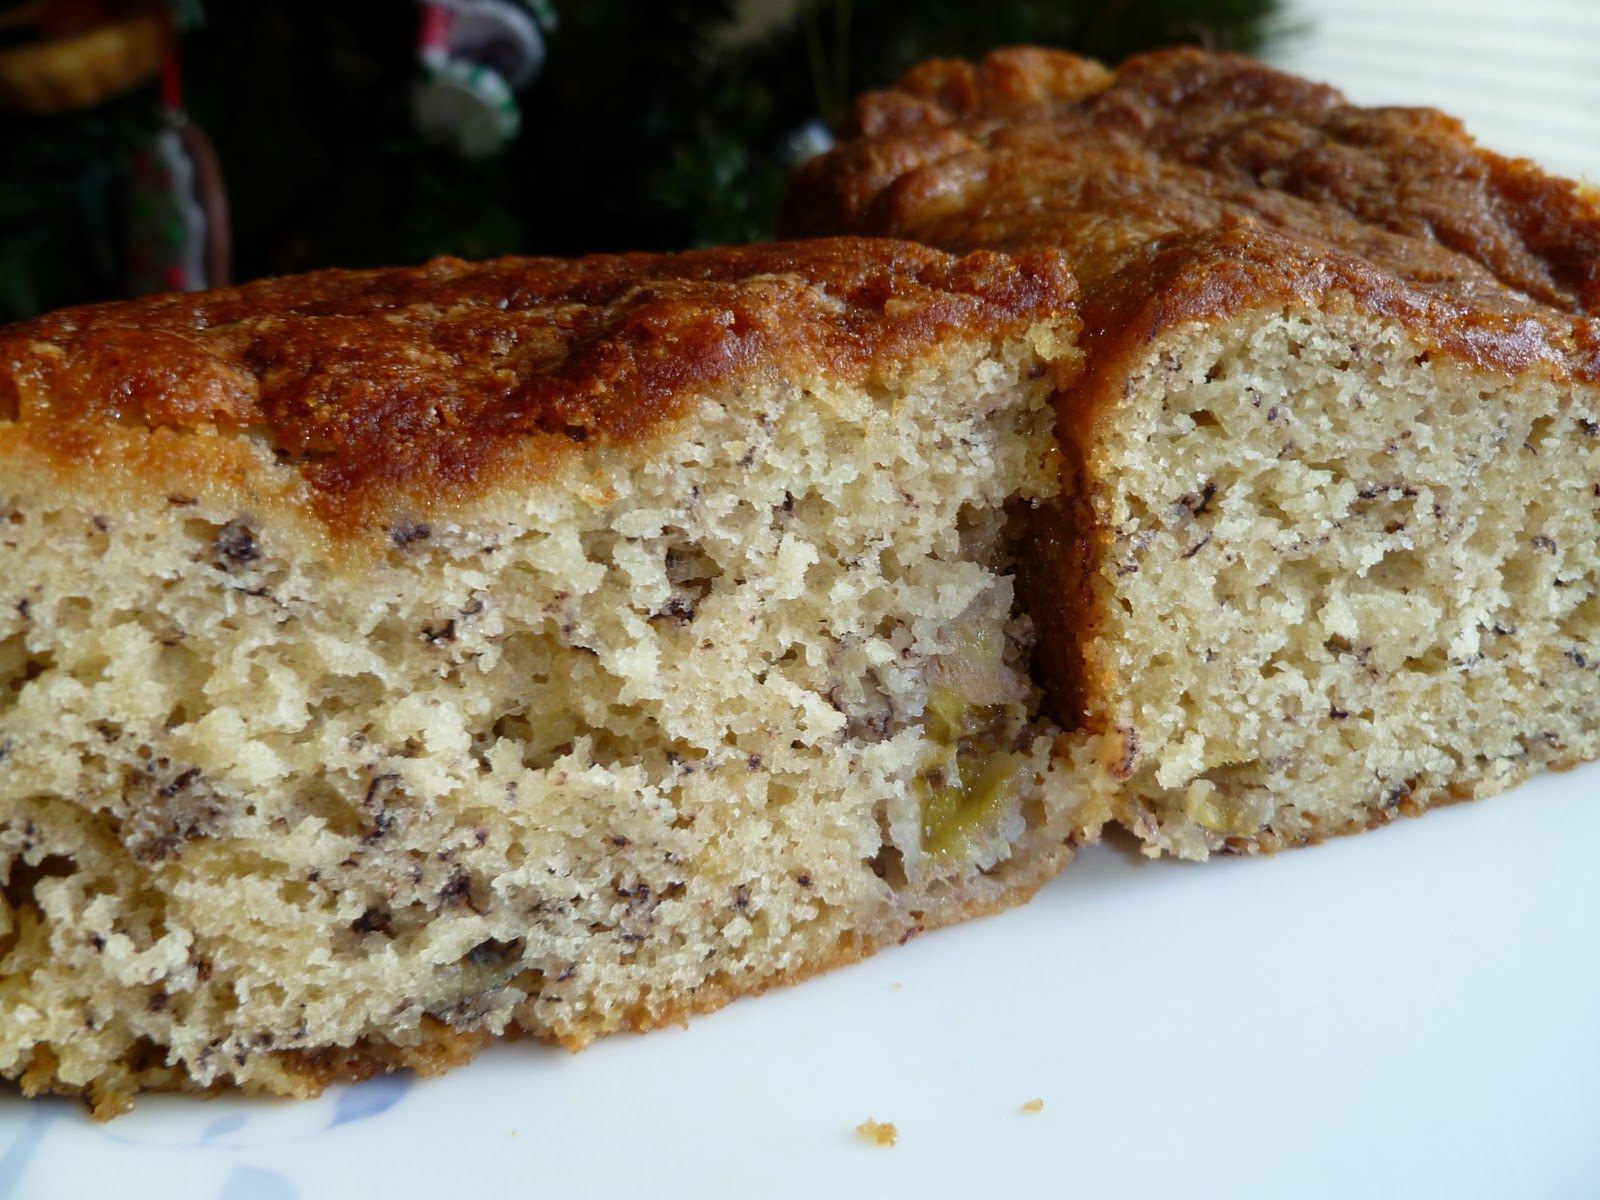 The Pastry Chef's Baking: Banana Bread - another easy holiday gift